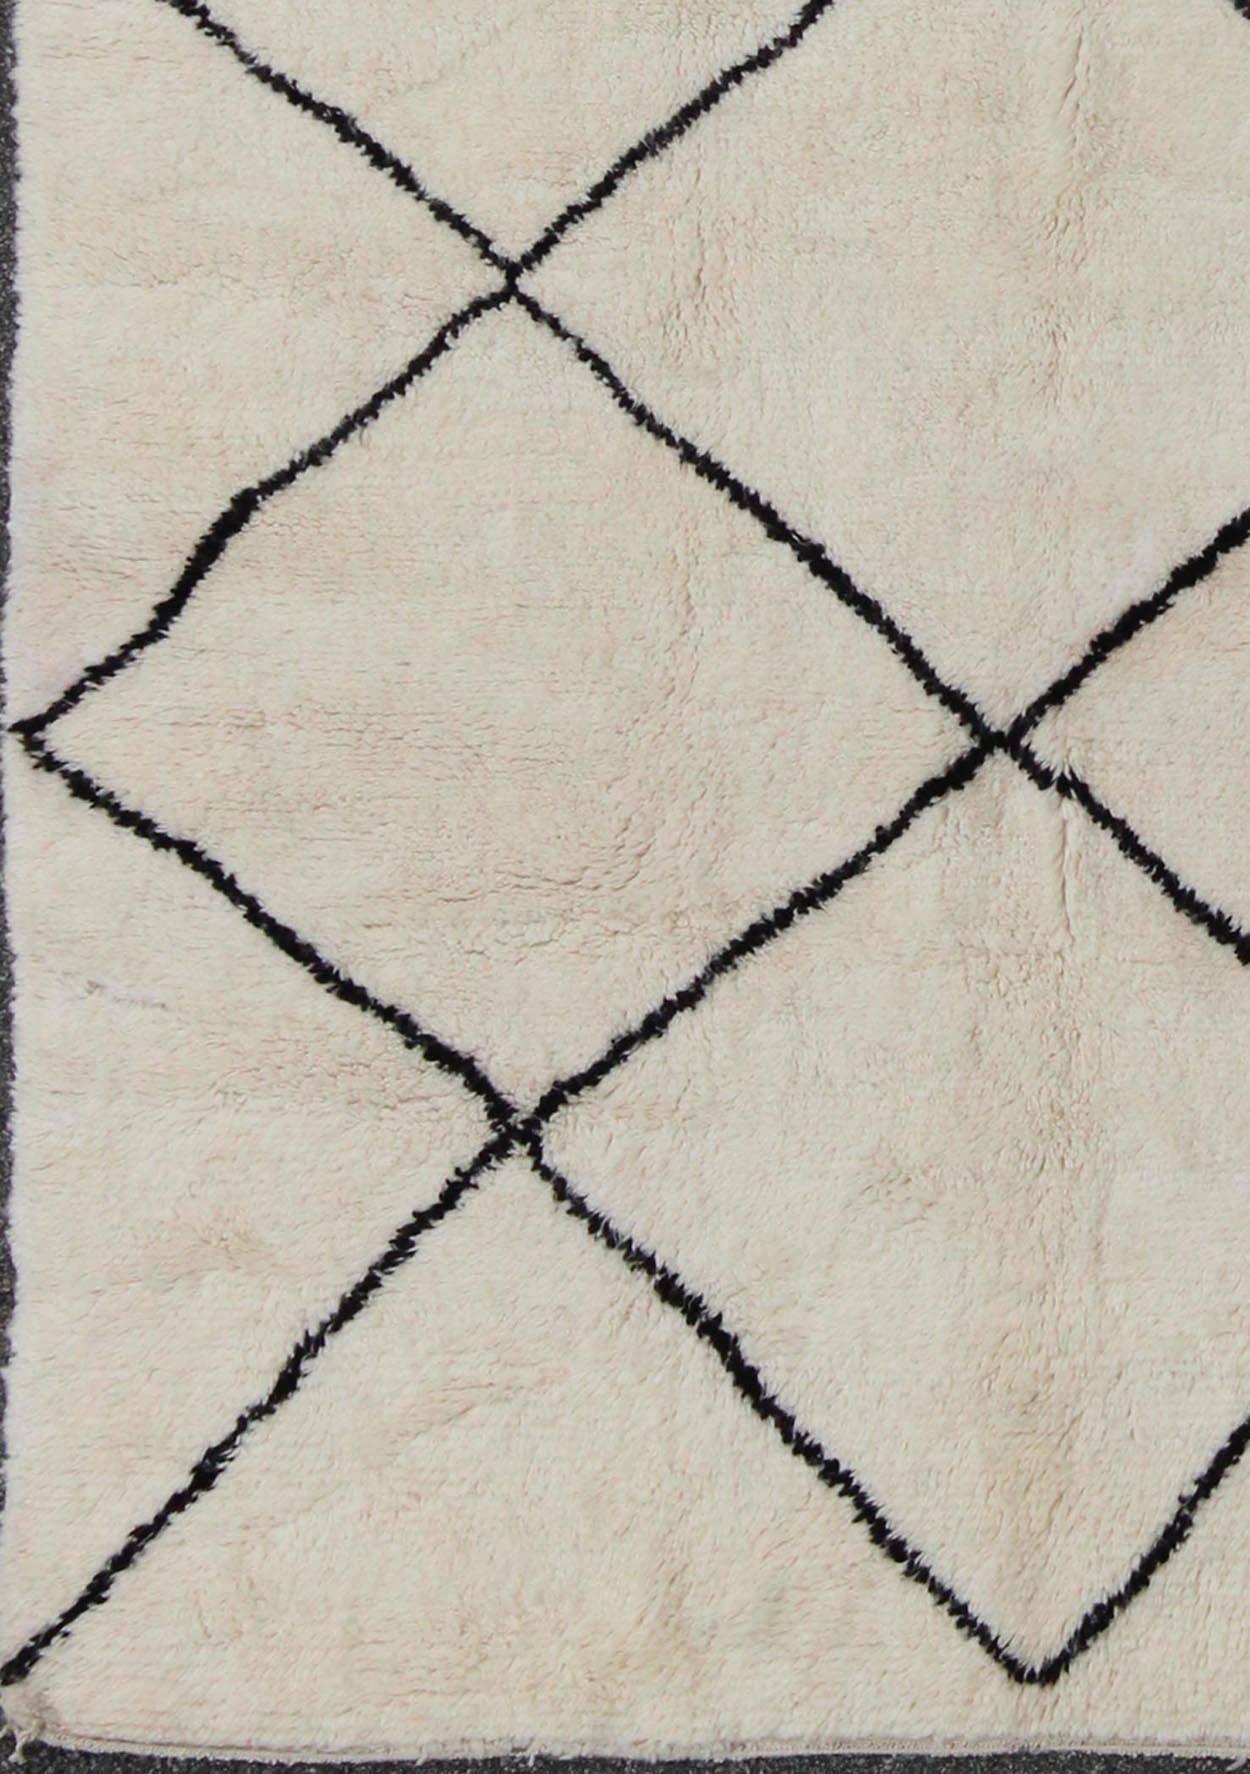 Contemporary/Modern Moroccan rug vintage with brown and ivory diamond pattern, rug 17-0901, country of origin / type: Morocco / Moroccan, circa 1960

This tribal, vintage 1960s Moroccan rug features a thin brown diamond/lattice pattern woven on an